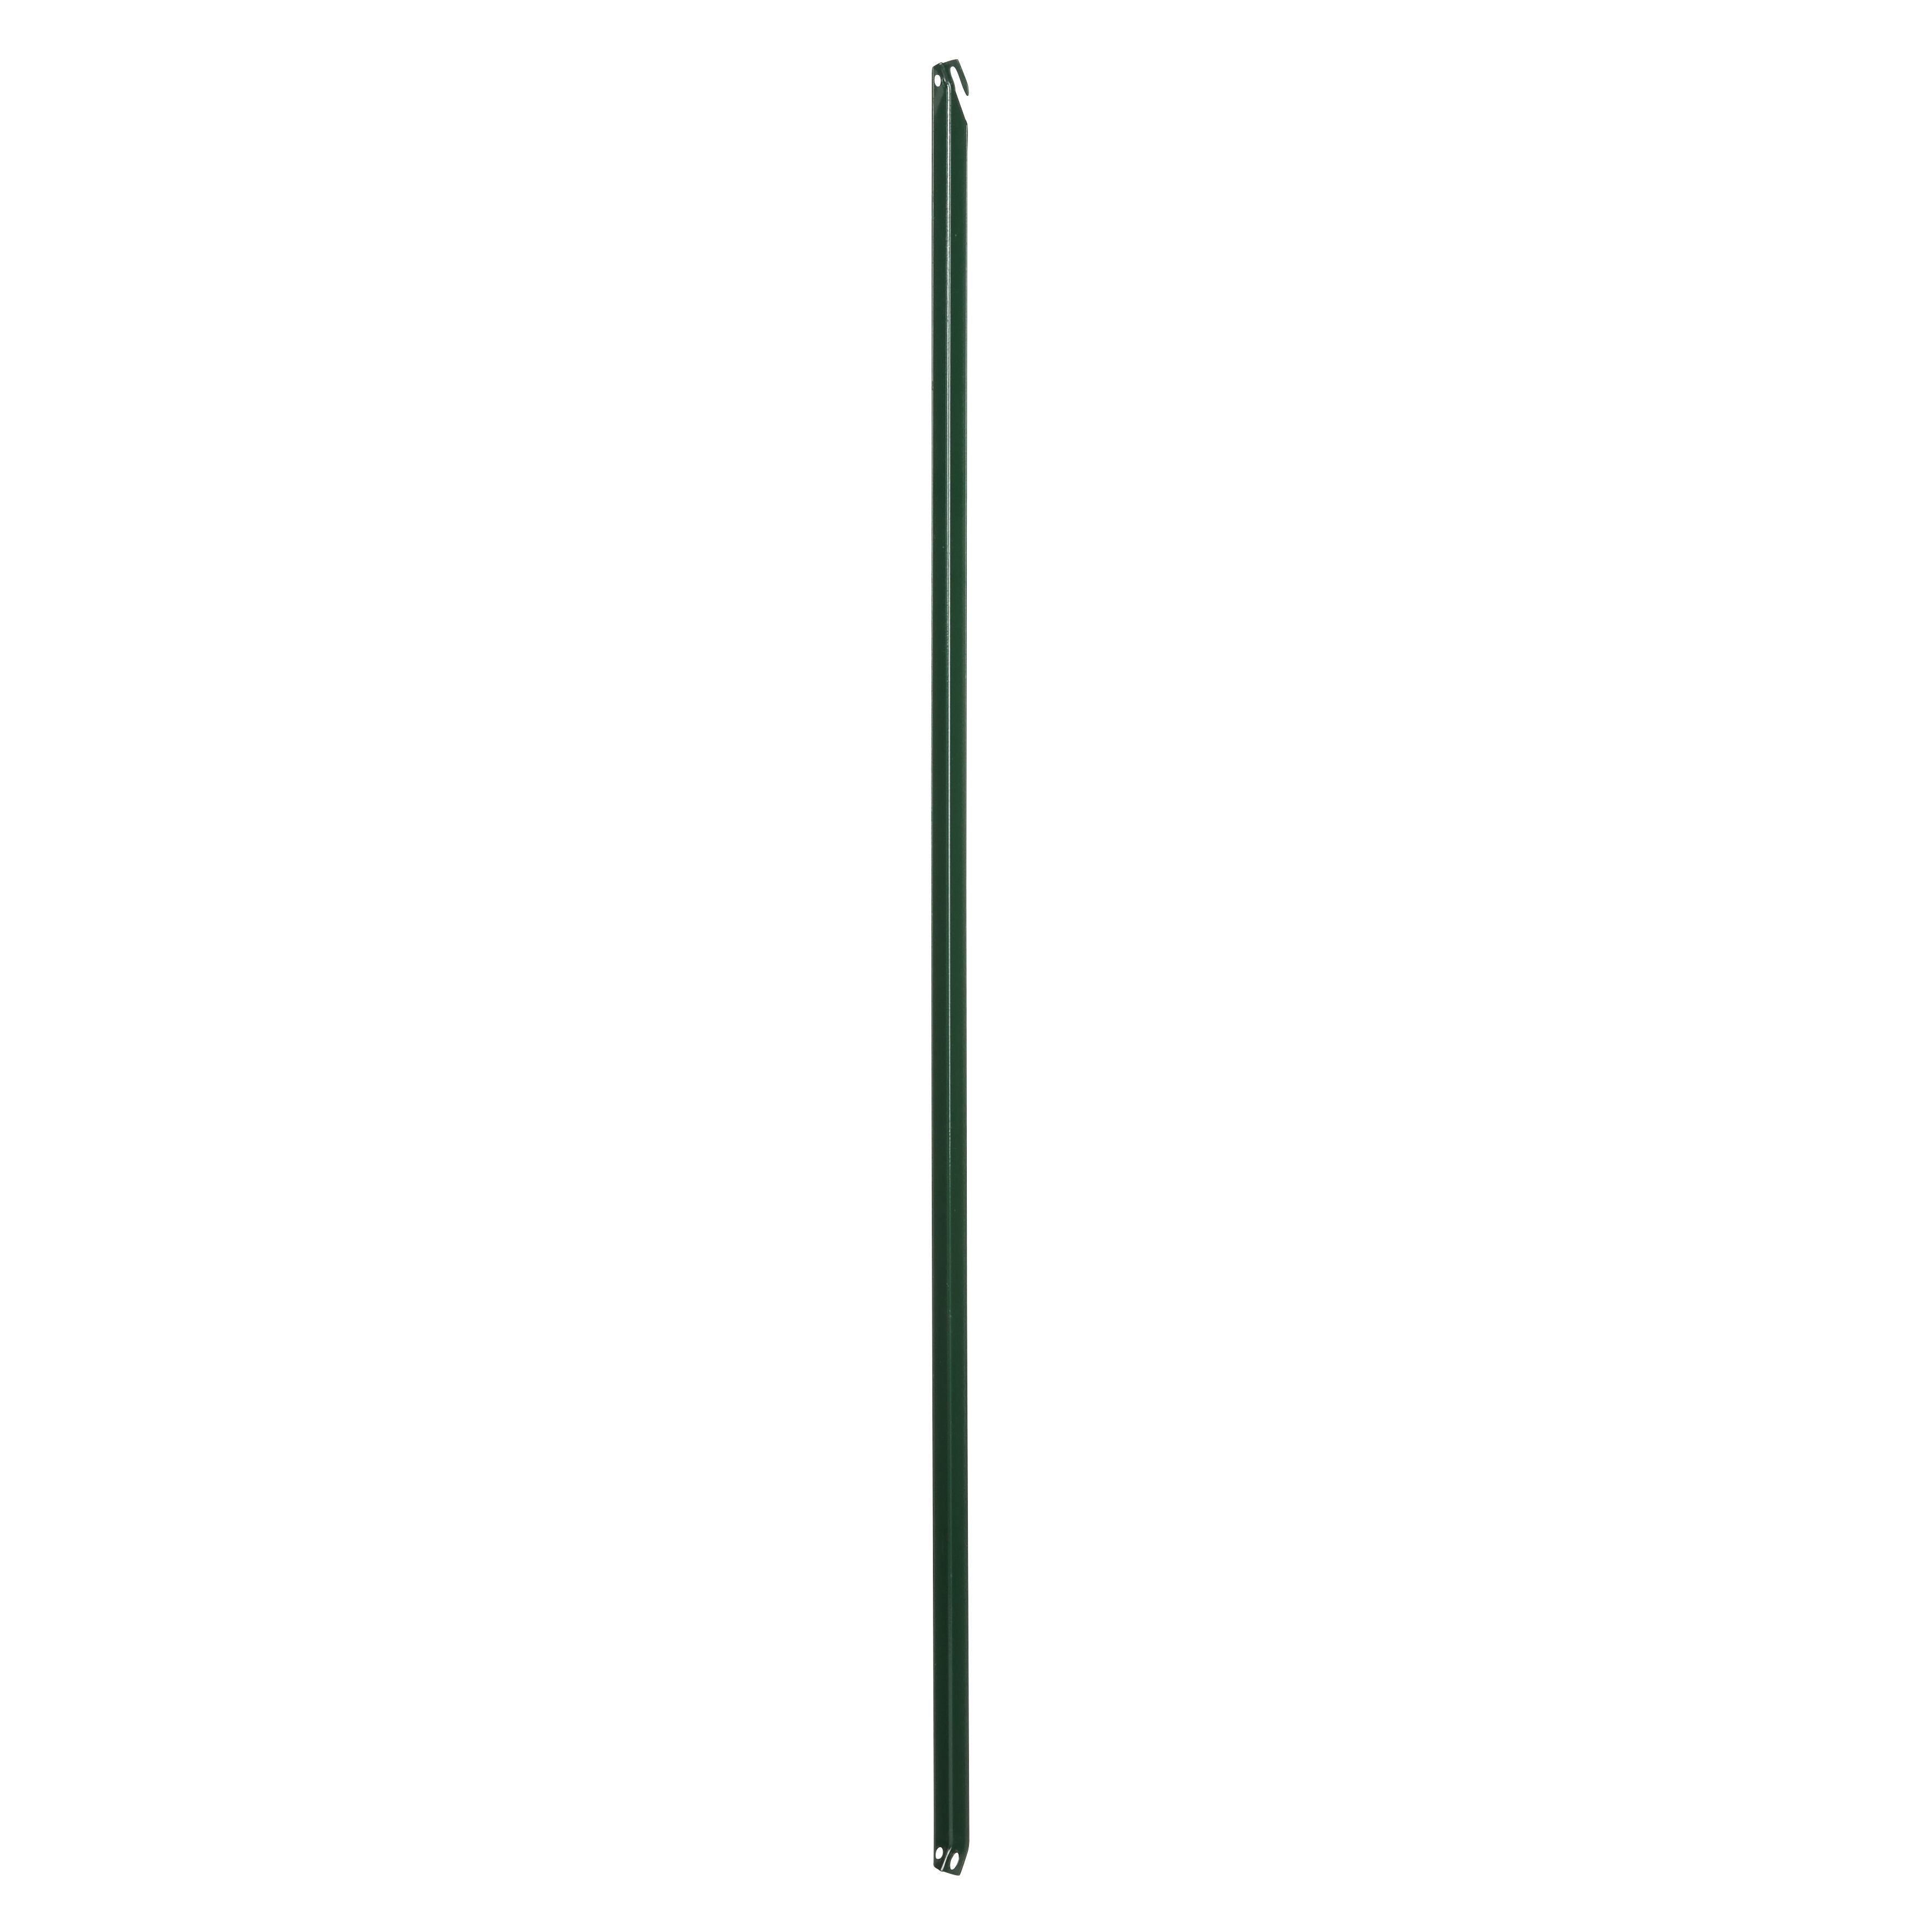 Blooma Steel Dark green L-shaped Reinforcing post (H)1.7m (W)25mm